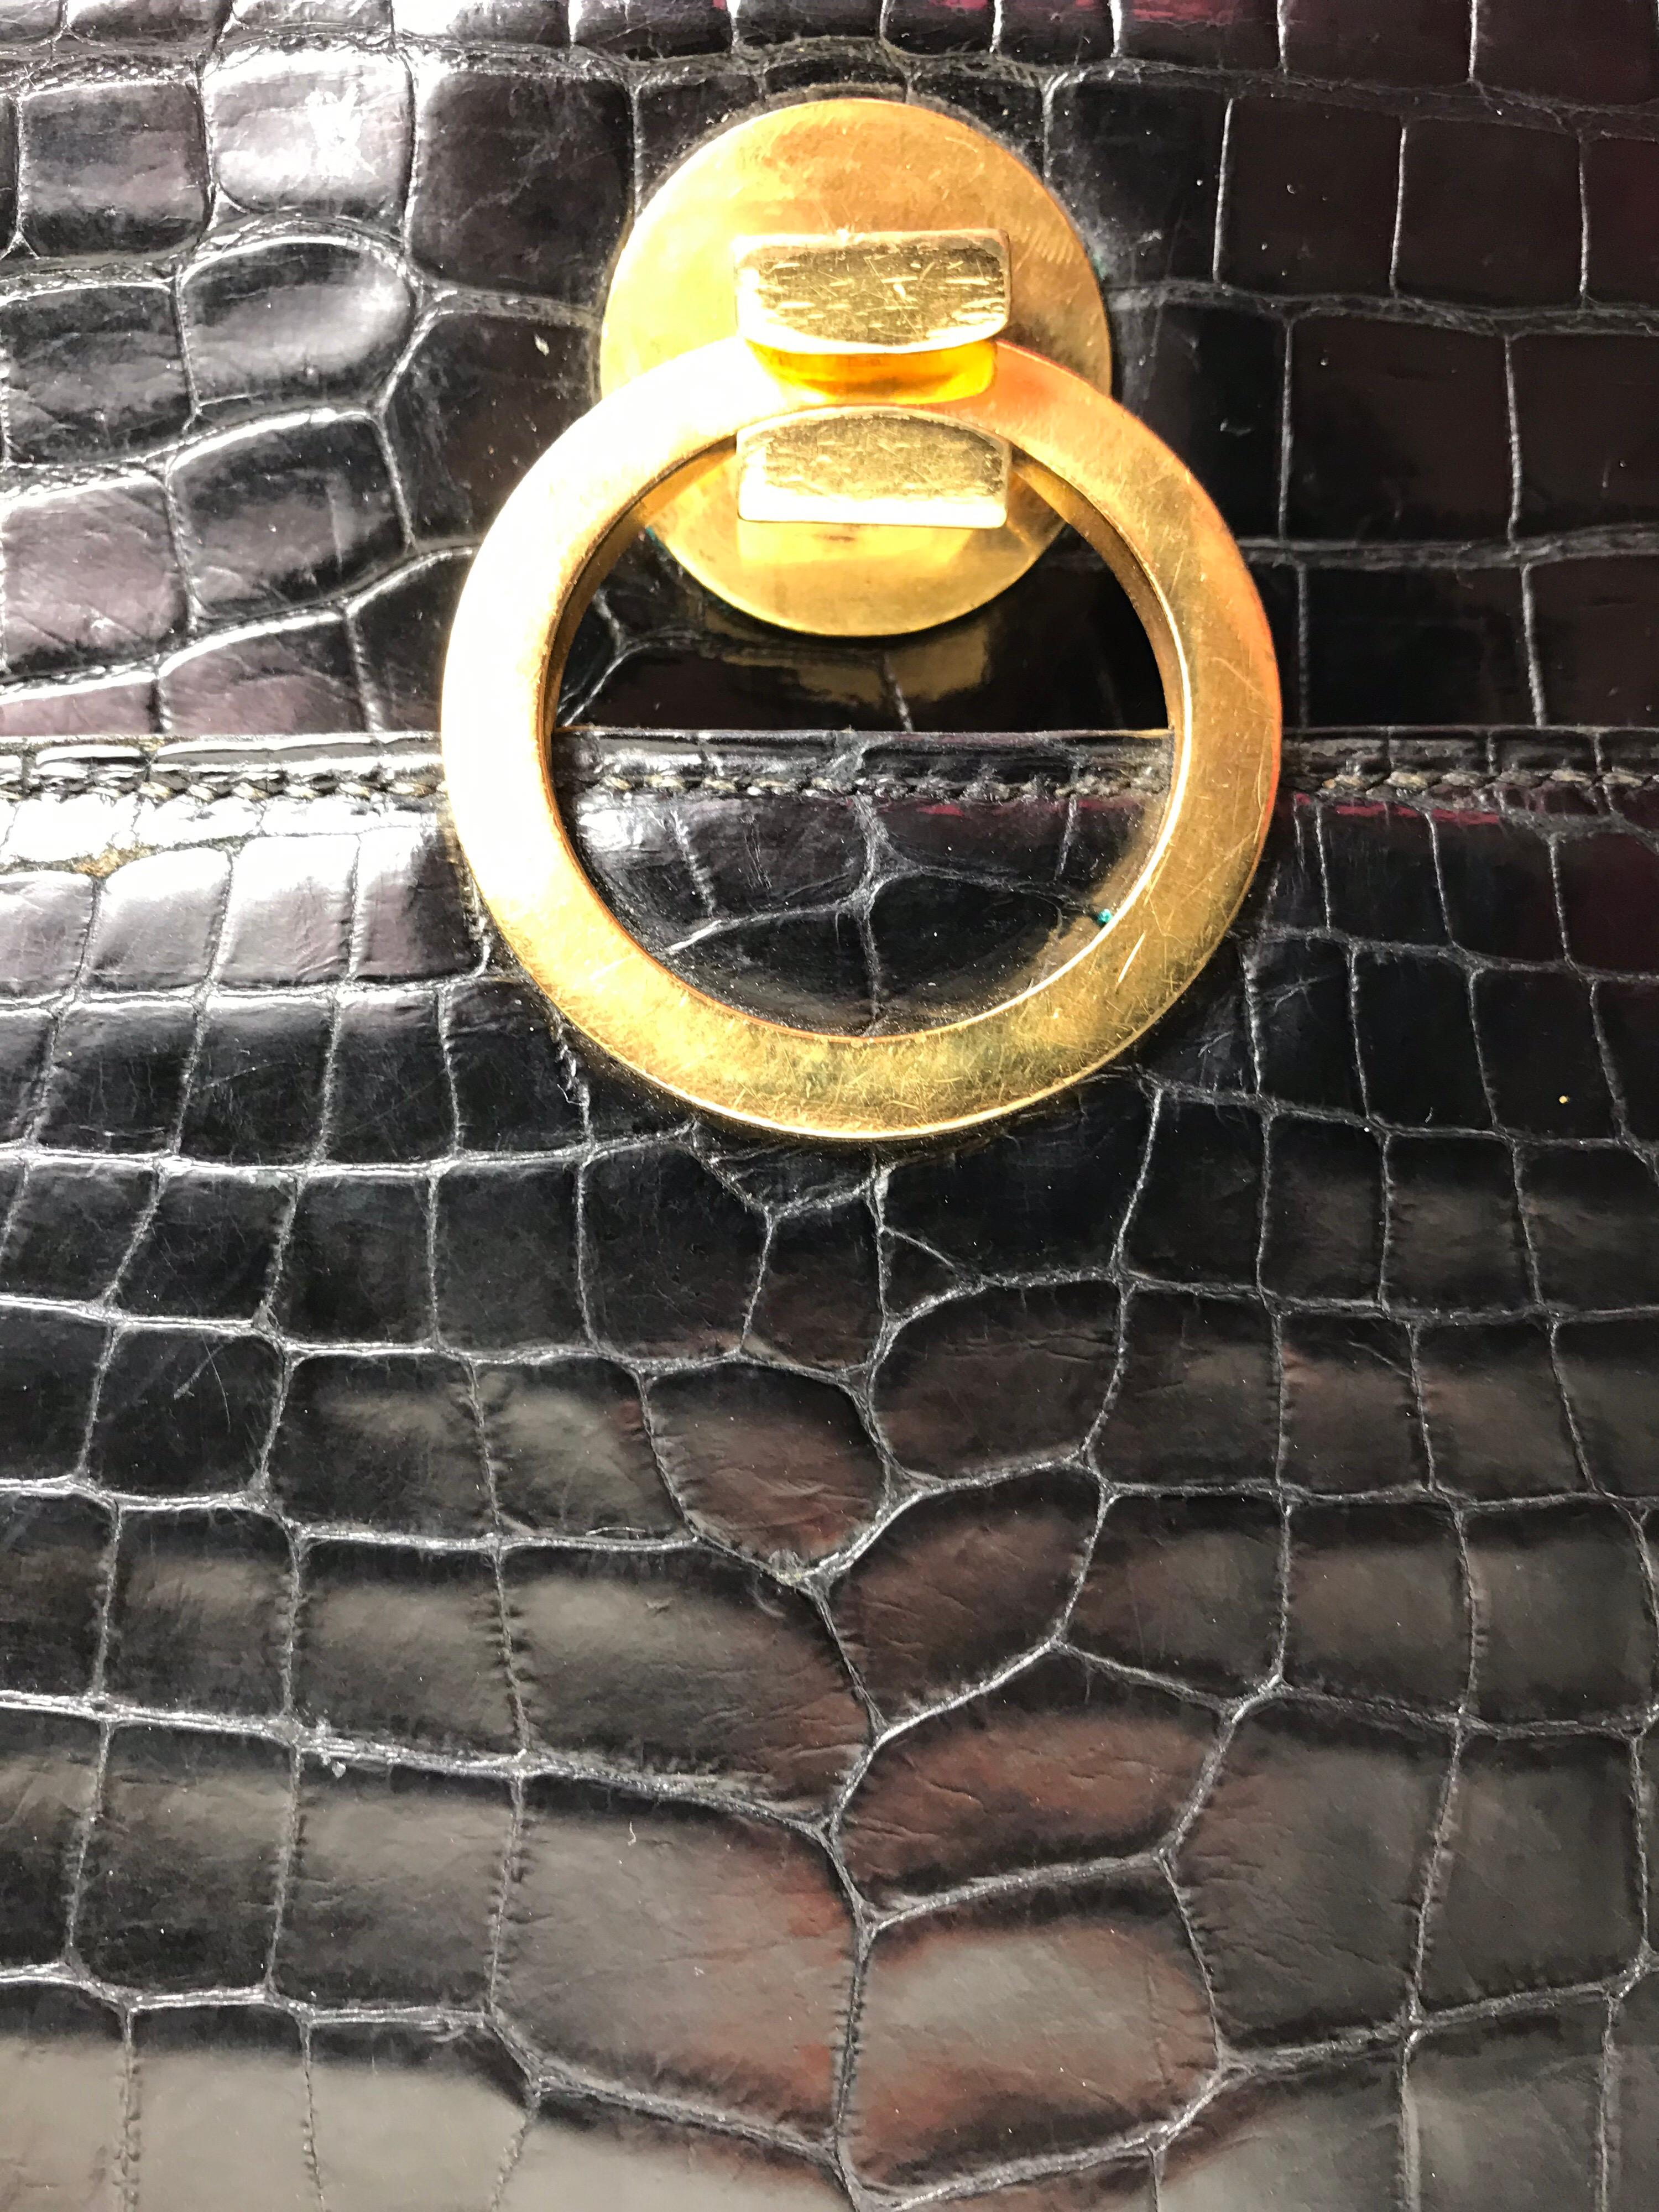 Hermès black crocodile vintage Sac Ring bag with gold-tone hardware. Single pocket at front flap underside, dual interior compartments, four pockets. 7” height, 10.25” width, 1.5” depth. Condition good wear to exterior and interior 